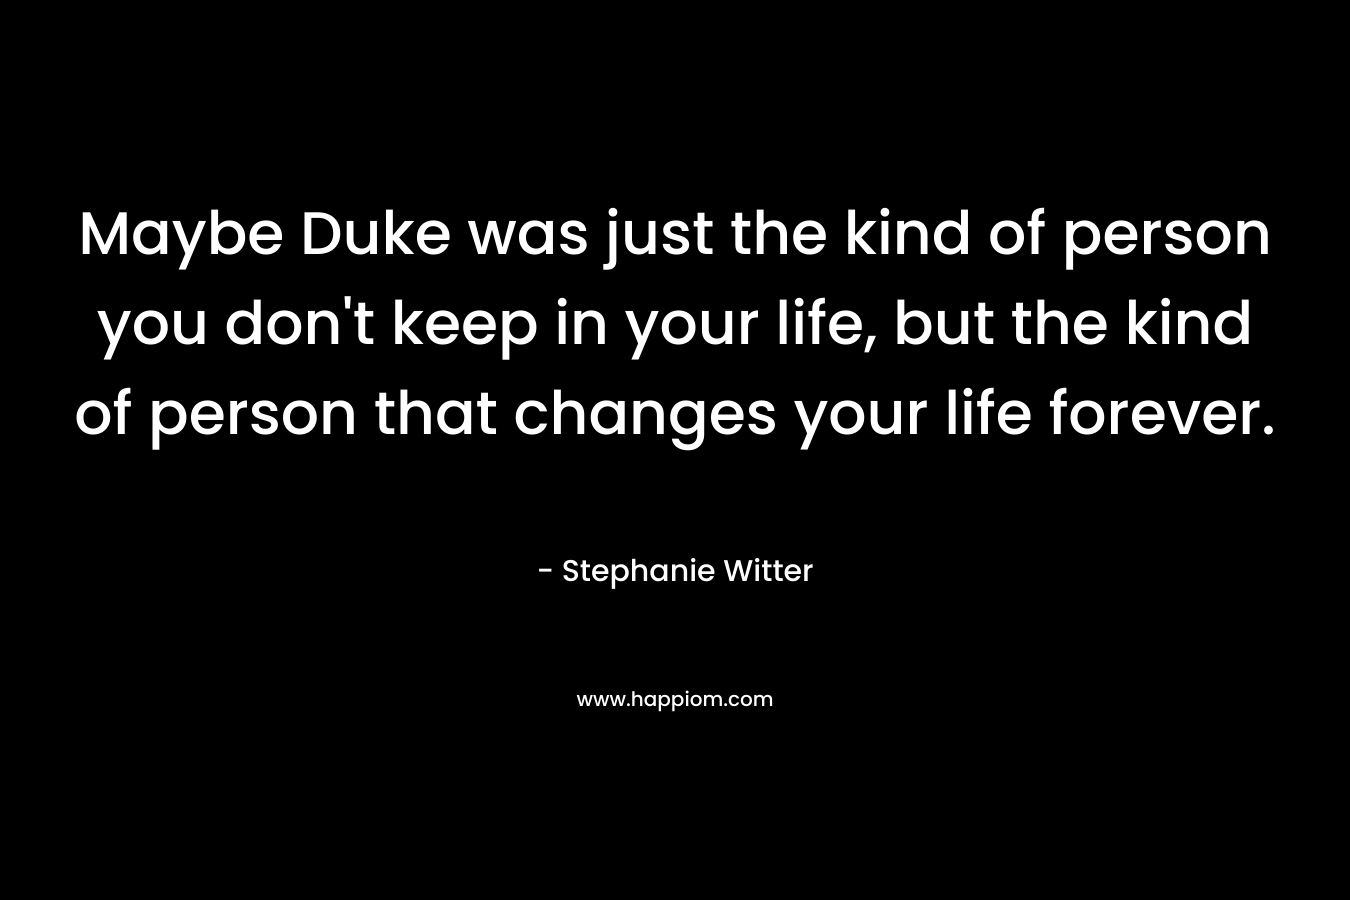 Maybe Duke was just the kind of person you don't keep in your life, but the kind of person that changes your life forever.